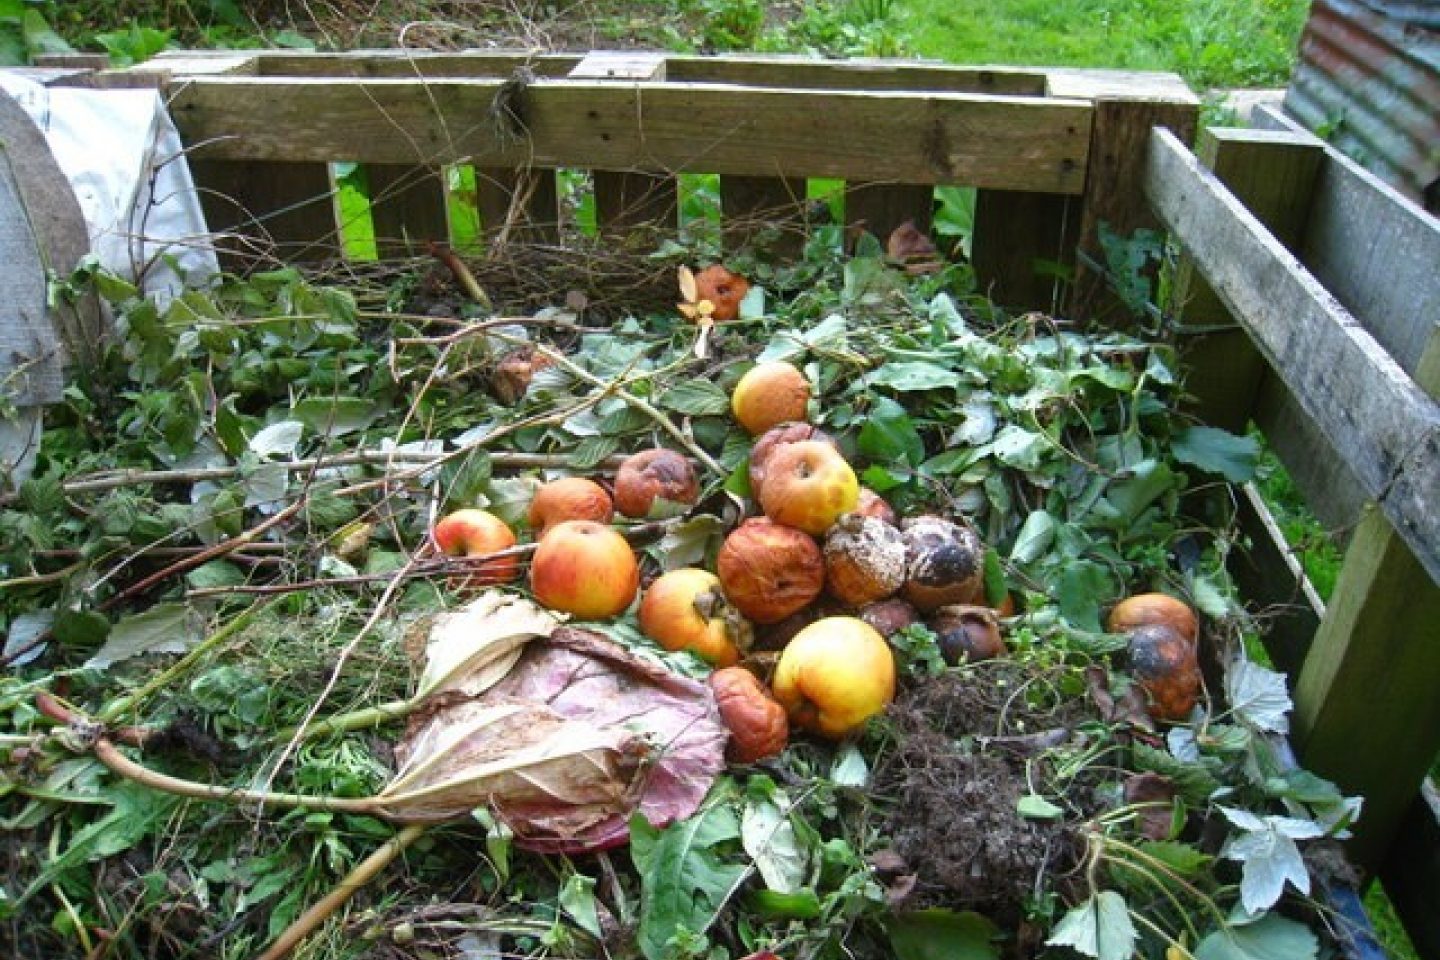 Compost pile with brown and green waste material including apples, cuttings and plant waste